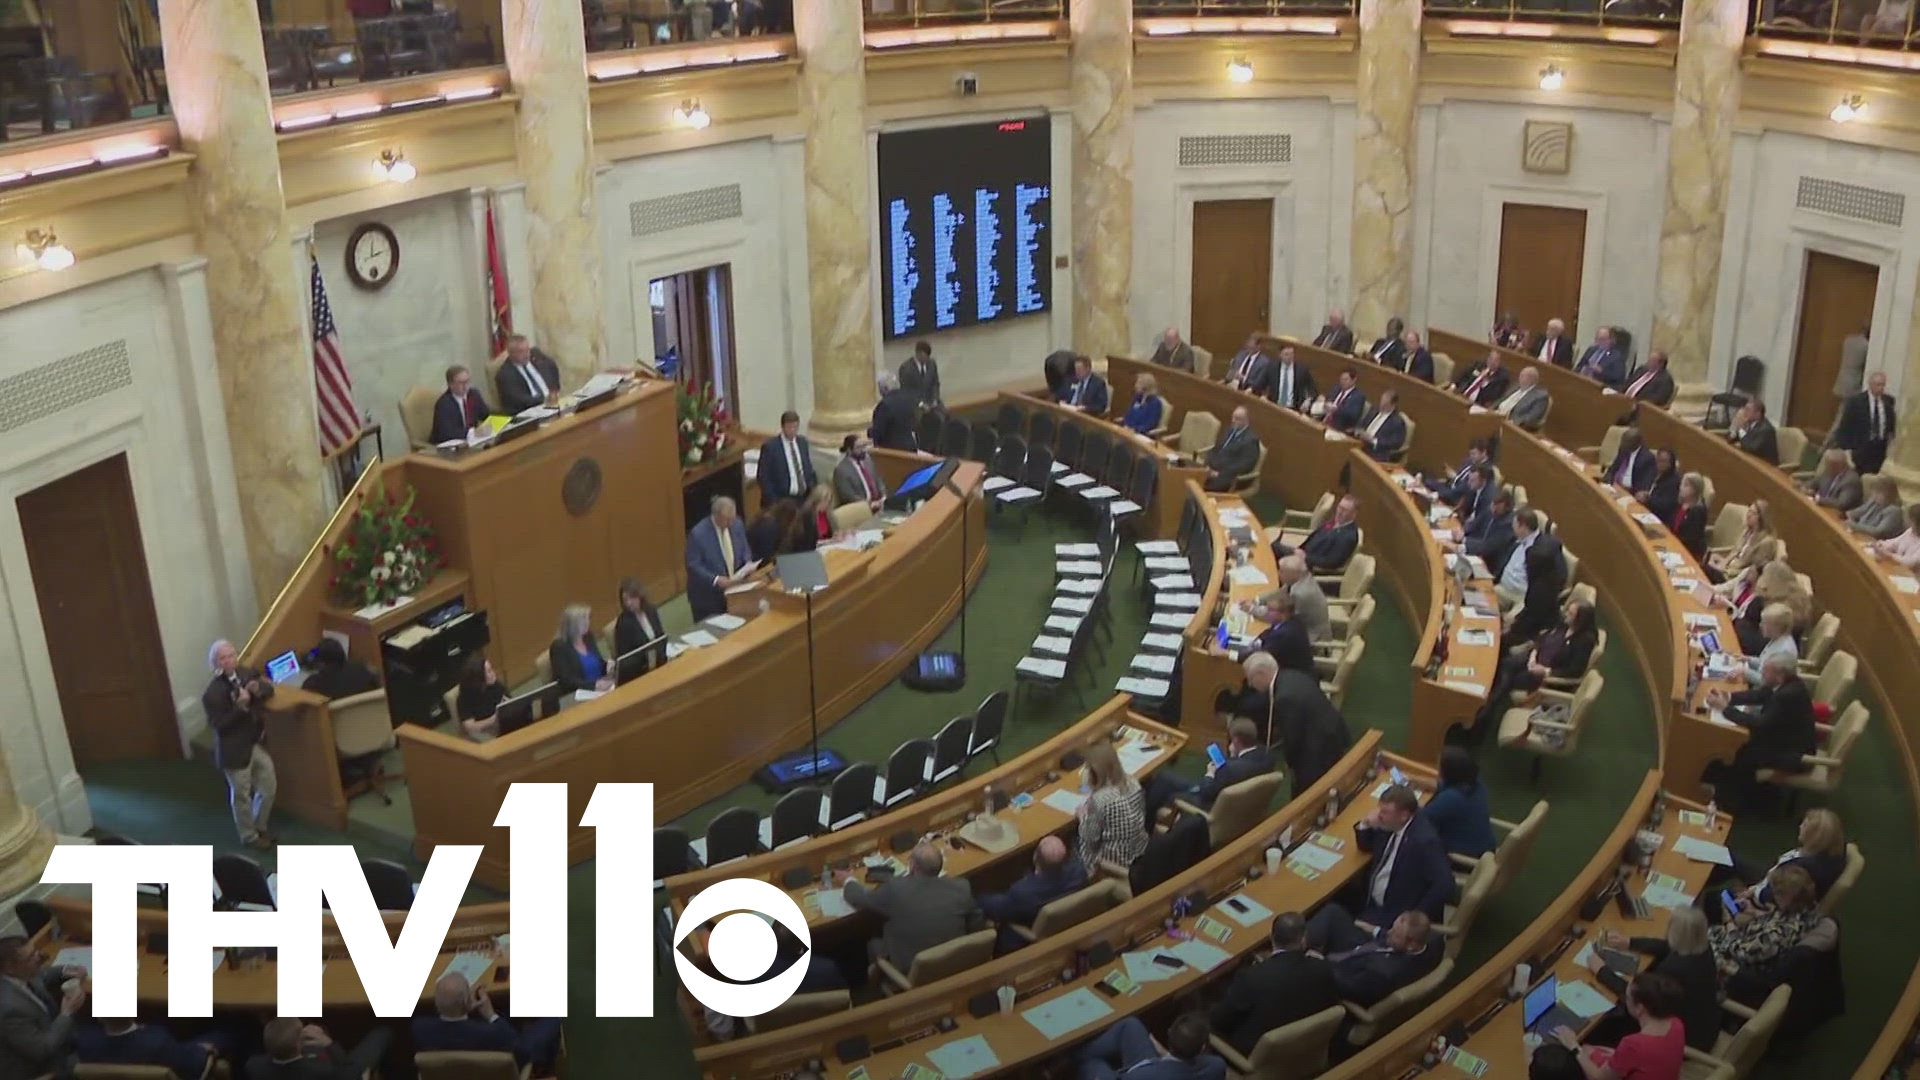 Much of the added spending will support Arkansas LEARNS, and lawmakers added that they also plan to discuss the potential of a special session for tax cuts.